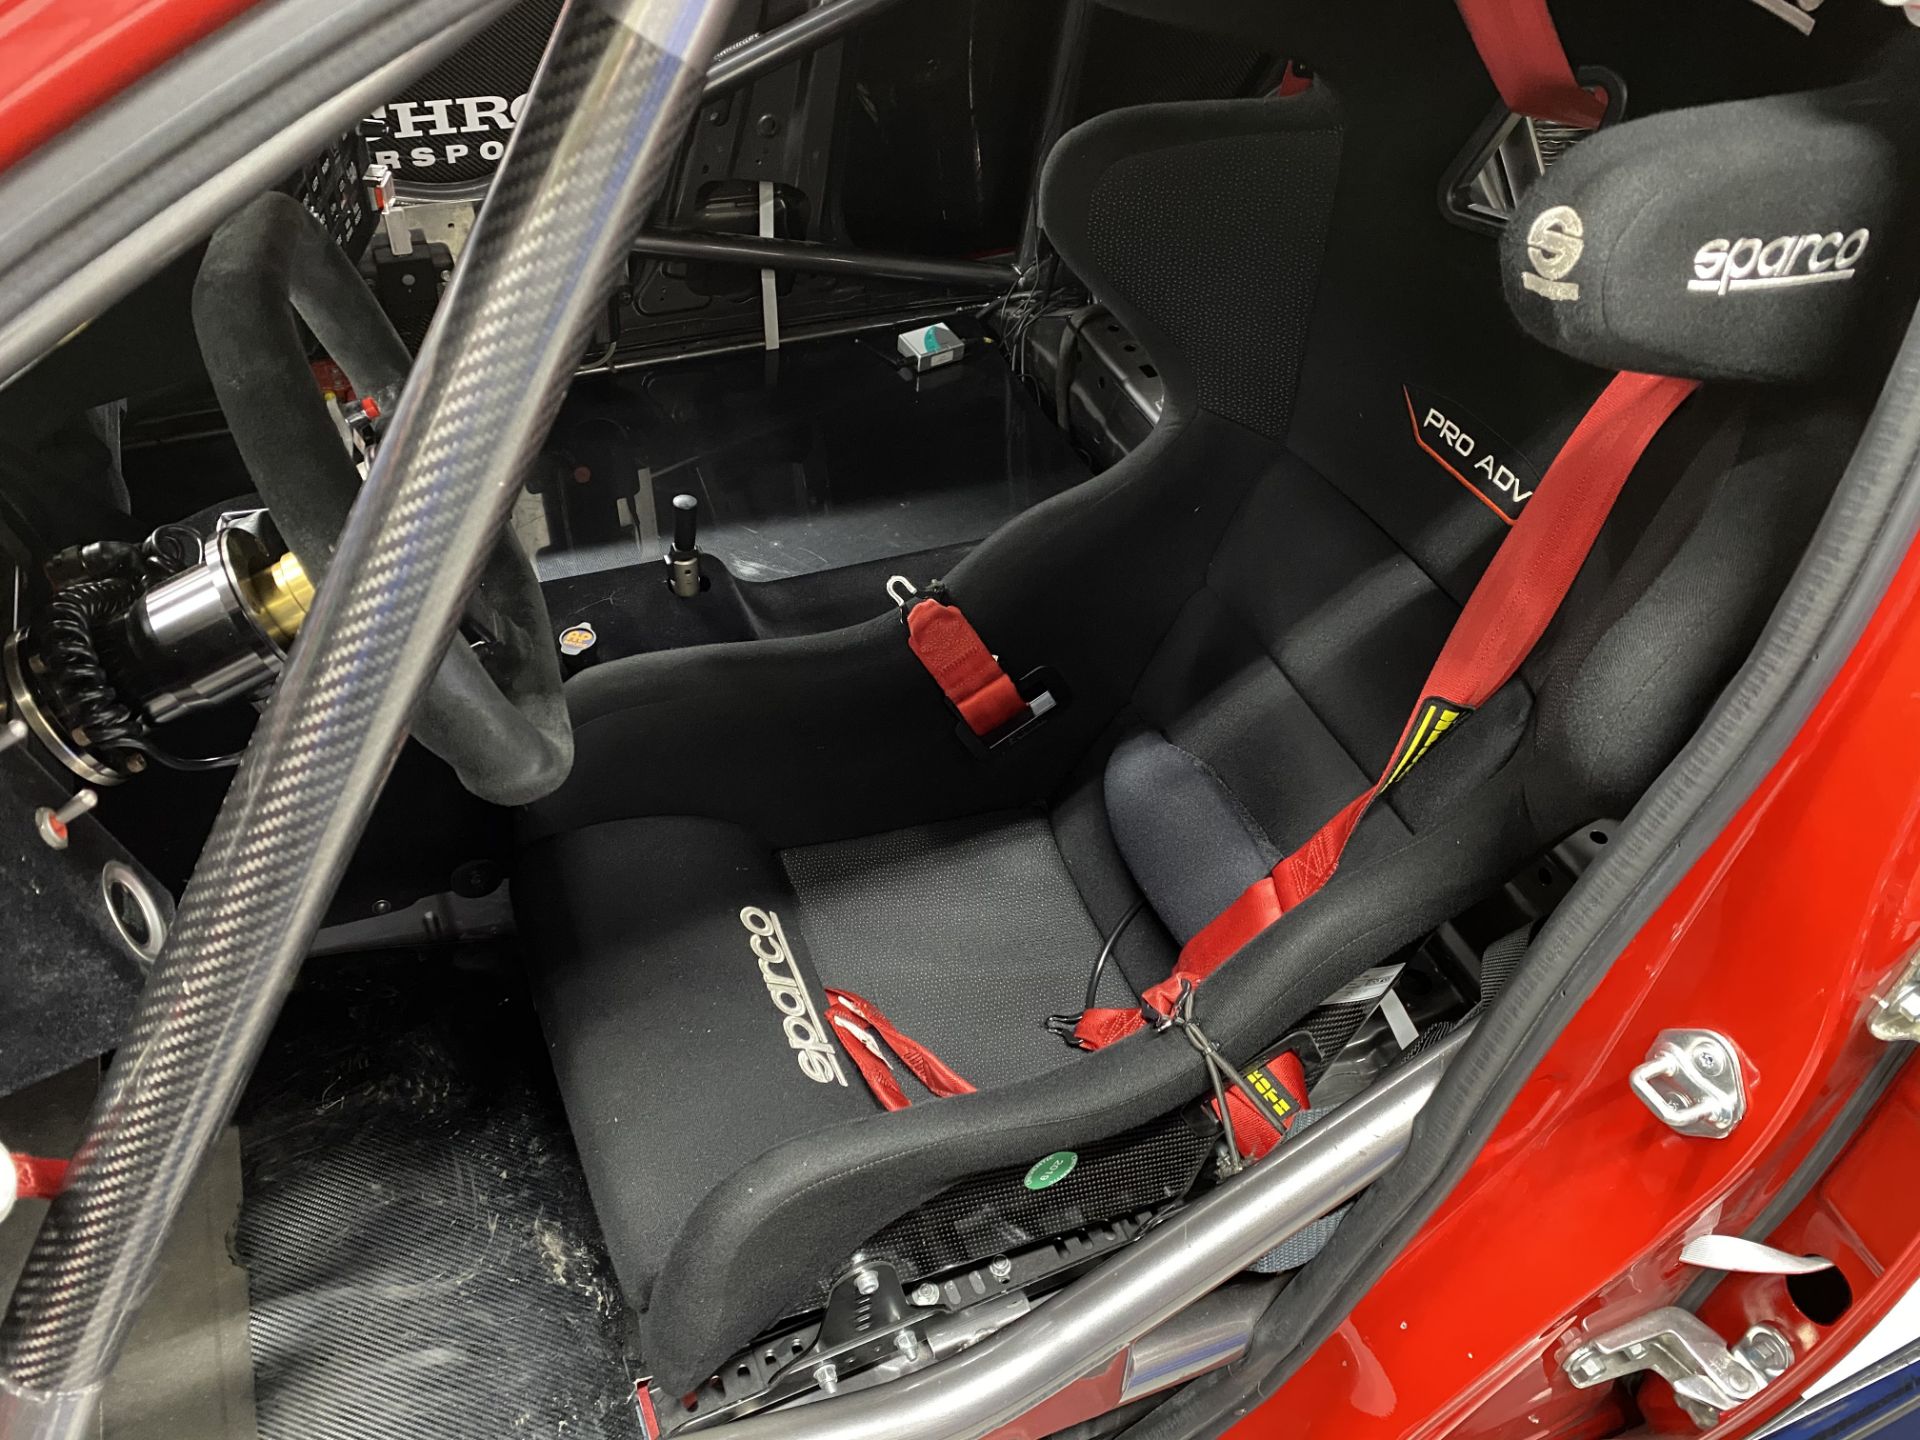 Honda Civic Endurance 20L FK8 type R left hand drive racing car, red and black paint finish, 2018 - Image 9 of 93